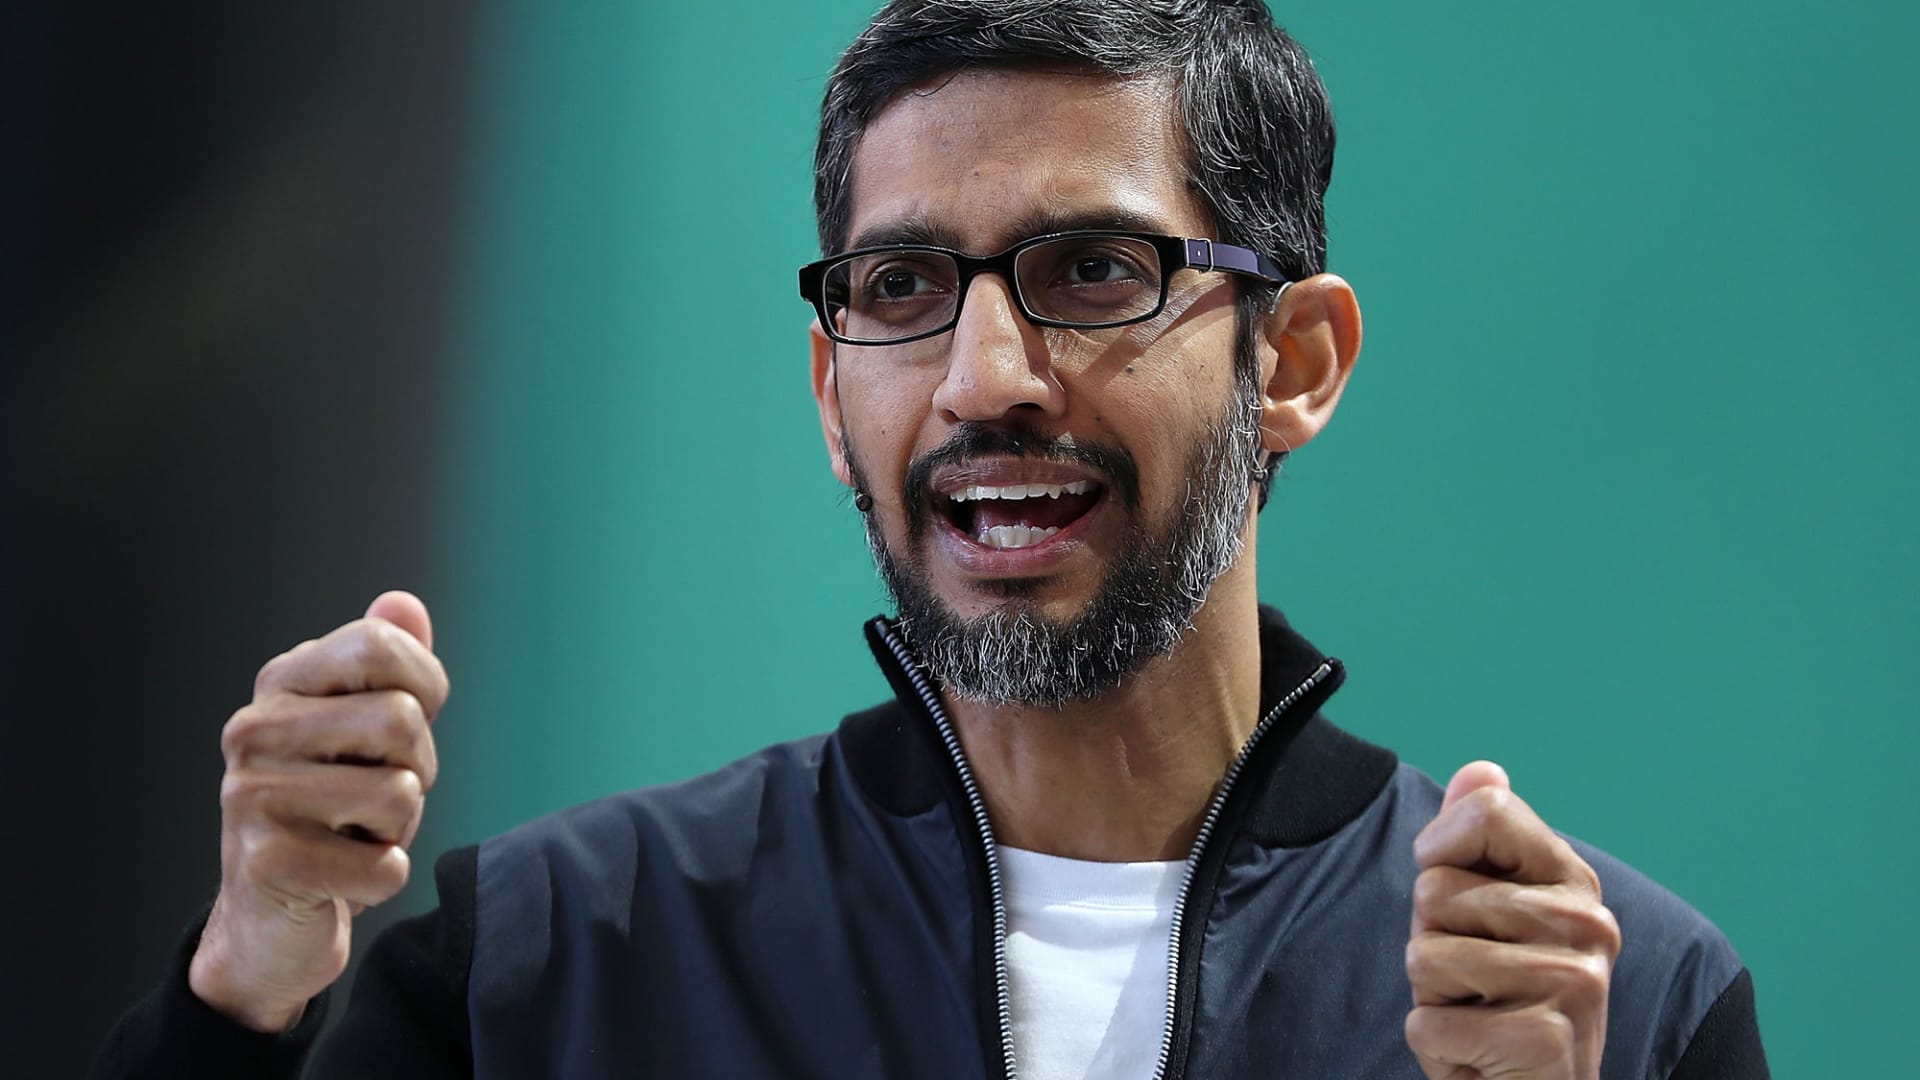 Google asks employees to rewrite Bard's bad responses, says the A.I. 'learns best by example'